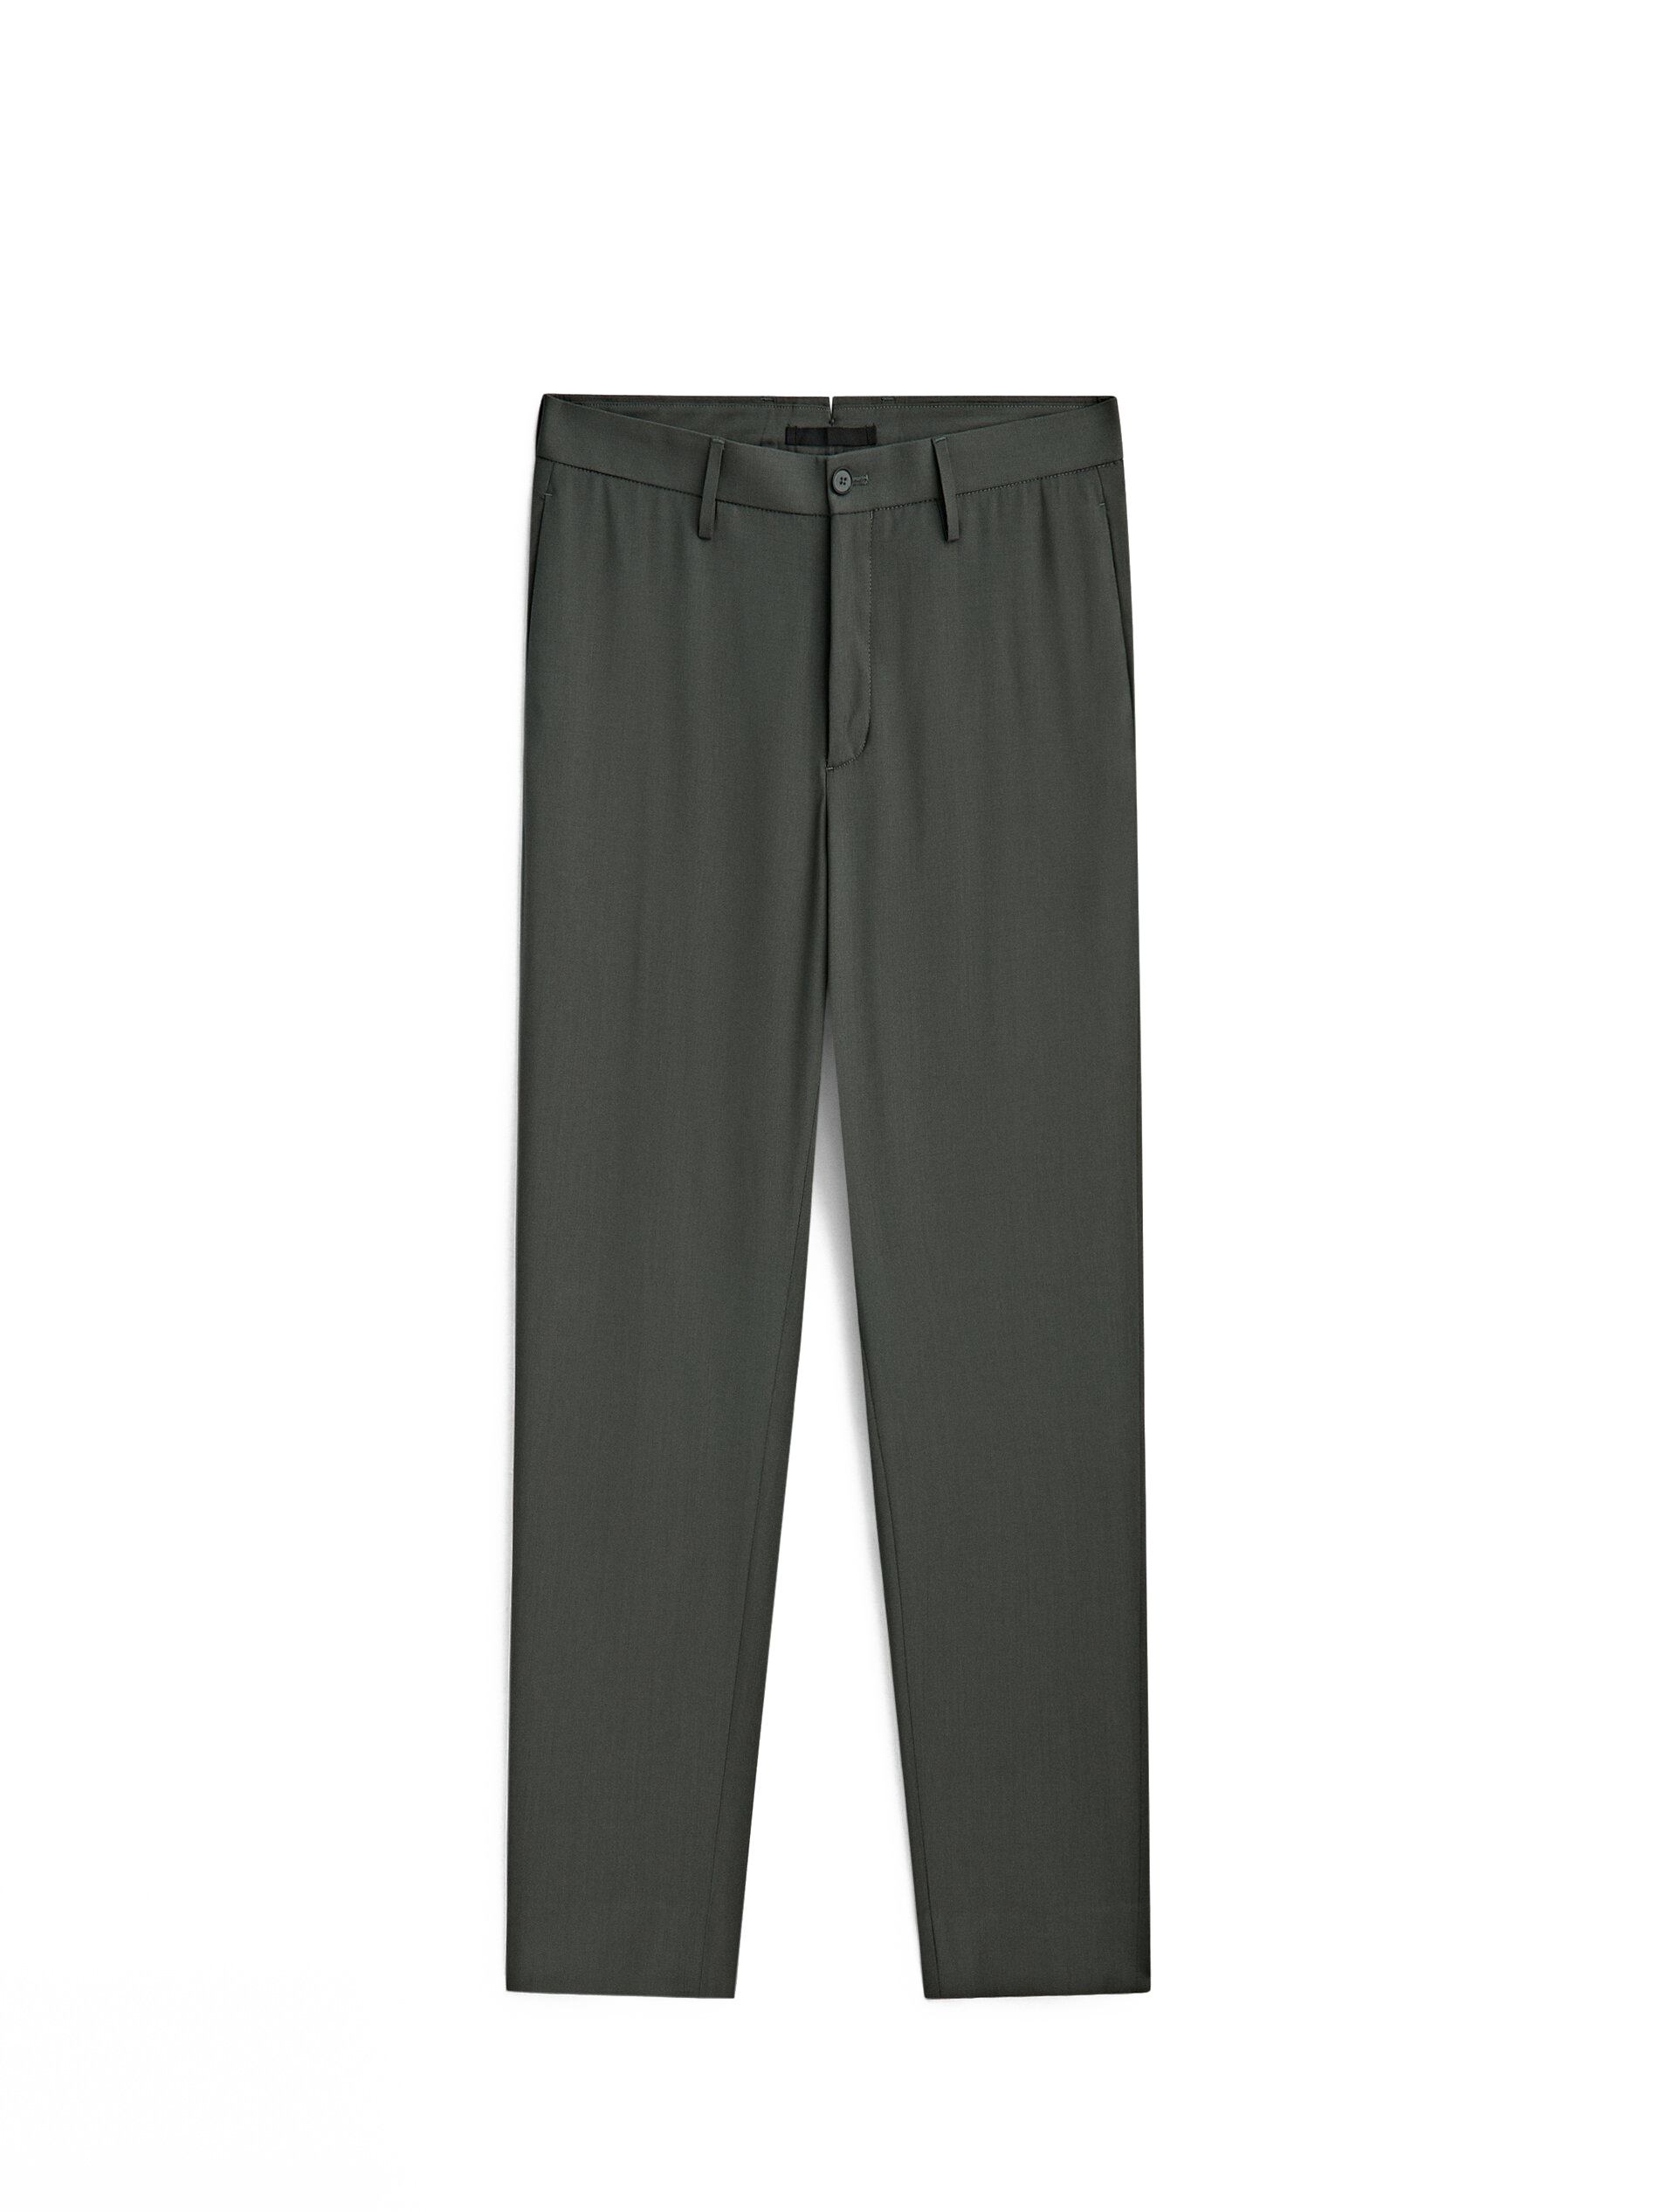 COLD WOOL SUIT TROUSERS - STUDIO